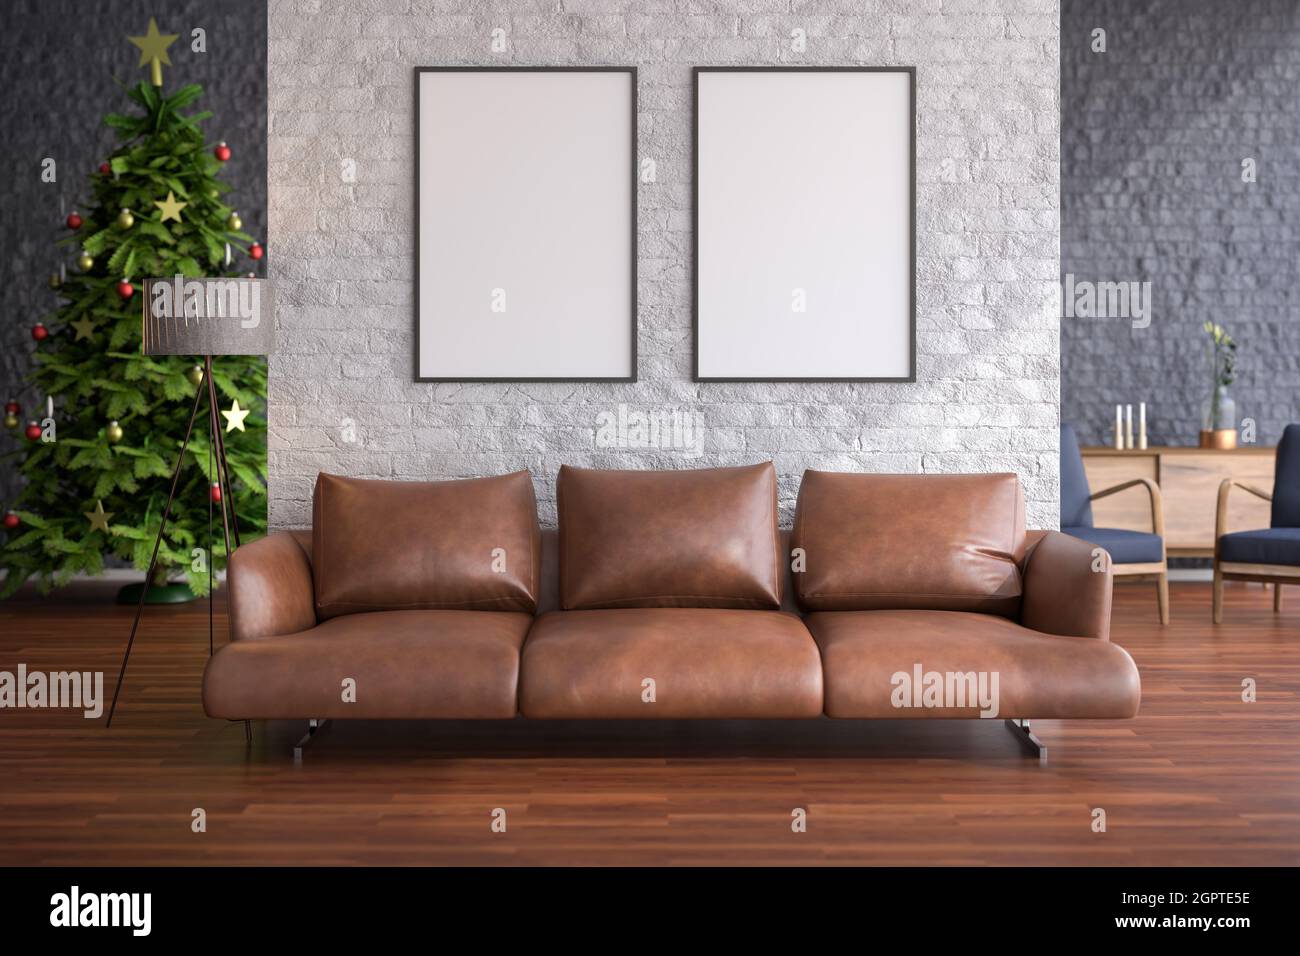 Living room with large Windows and christmas tree, sofa, floor lamp, white brick divider wall with two large empty frame mockups. Stock Photo